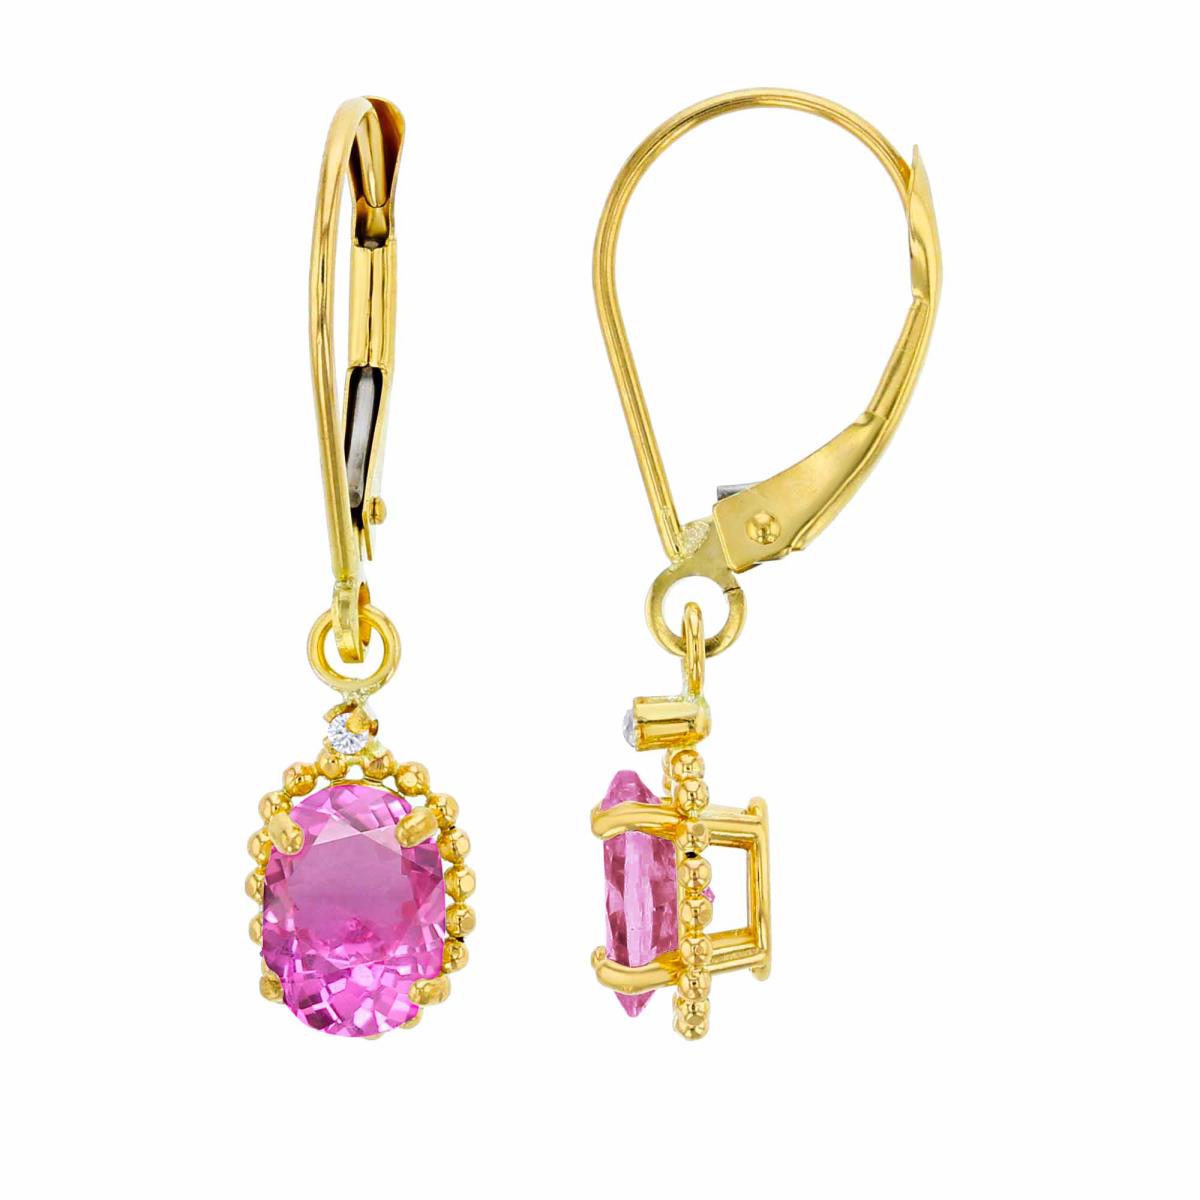 14K Yellow Gold 1.25mm Rd Created White Sapphire & 6x4mm Ov Created Pink Sapphire Bead Frame Drop Lever-Back Earring